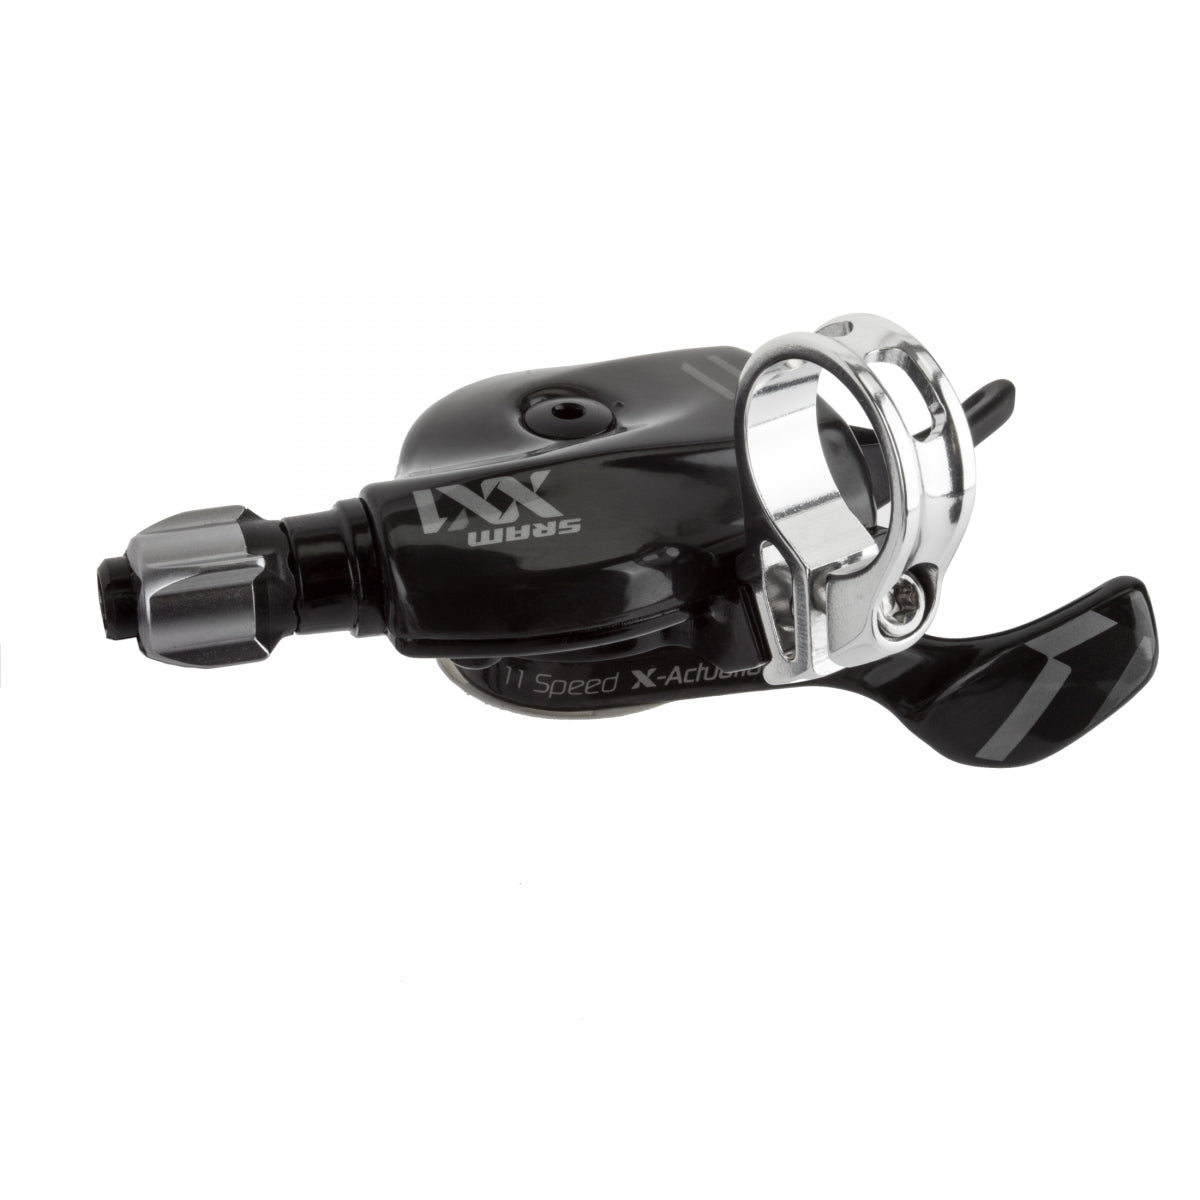 SRAM XX1 Trigger Shifter with Clamp, Right-Hand, 11-Speed, Black